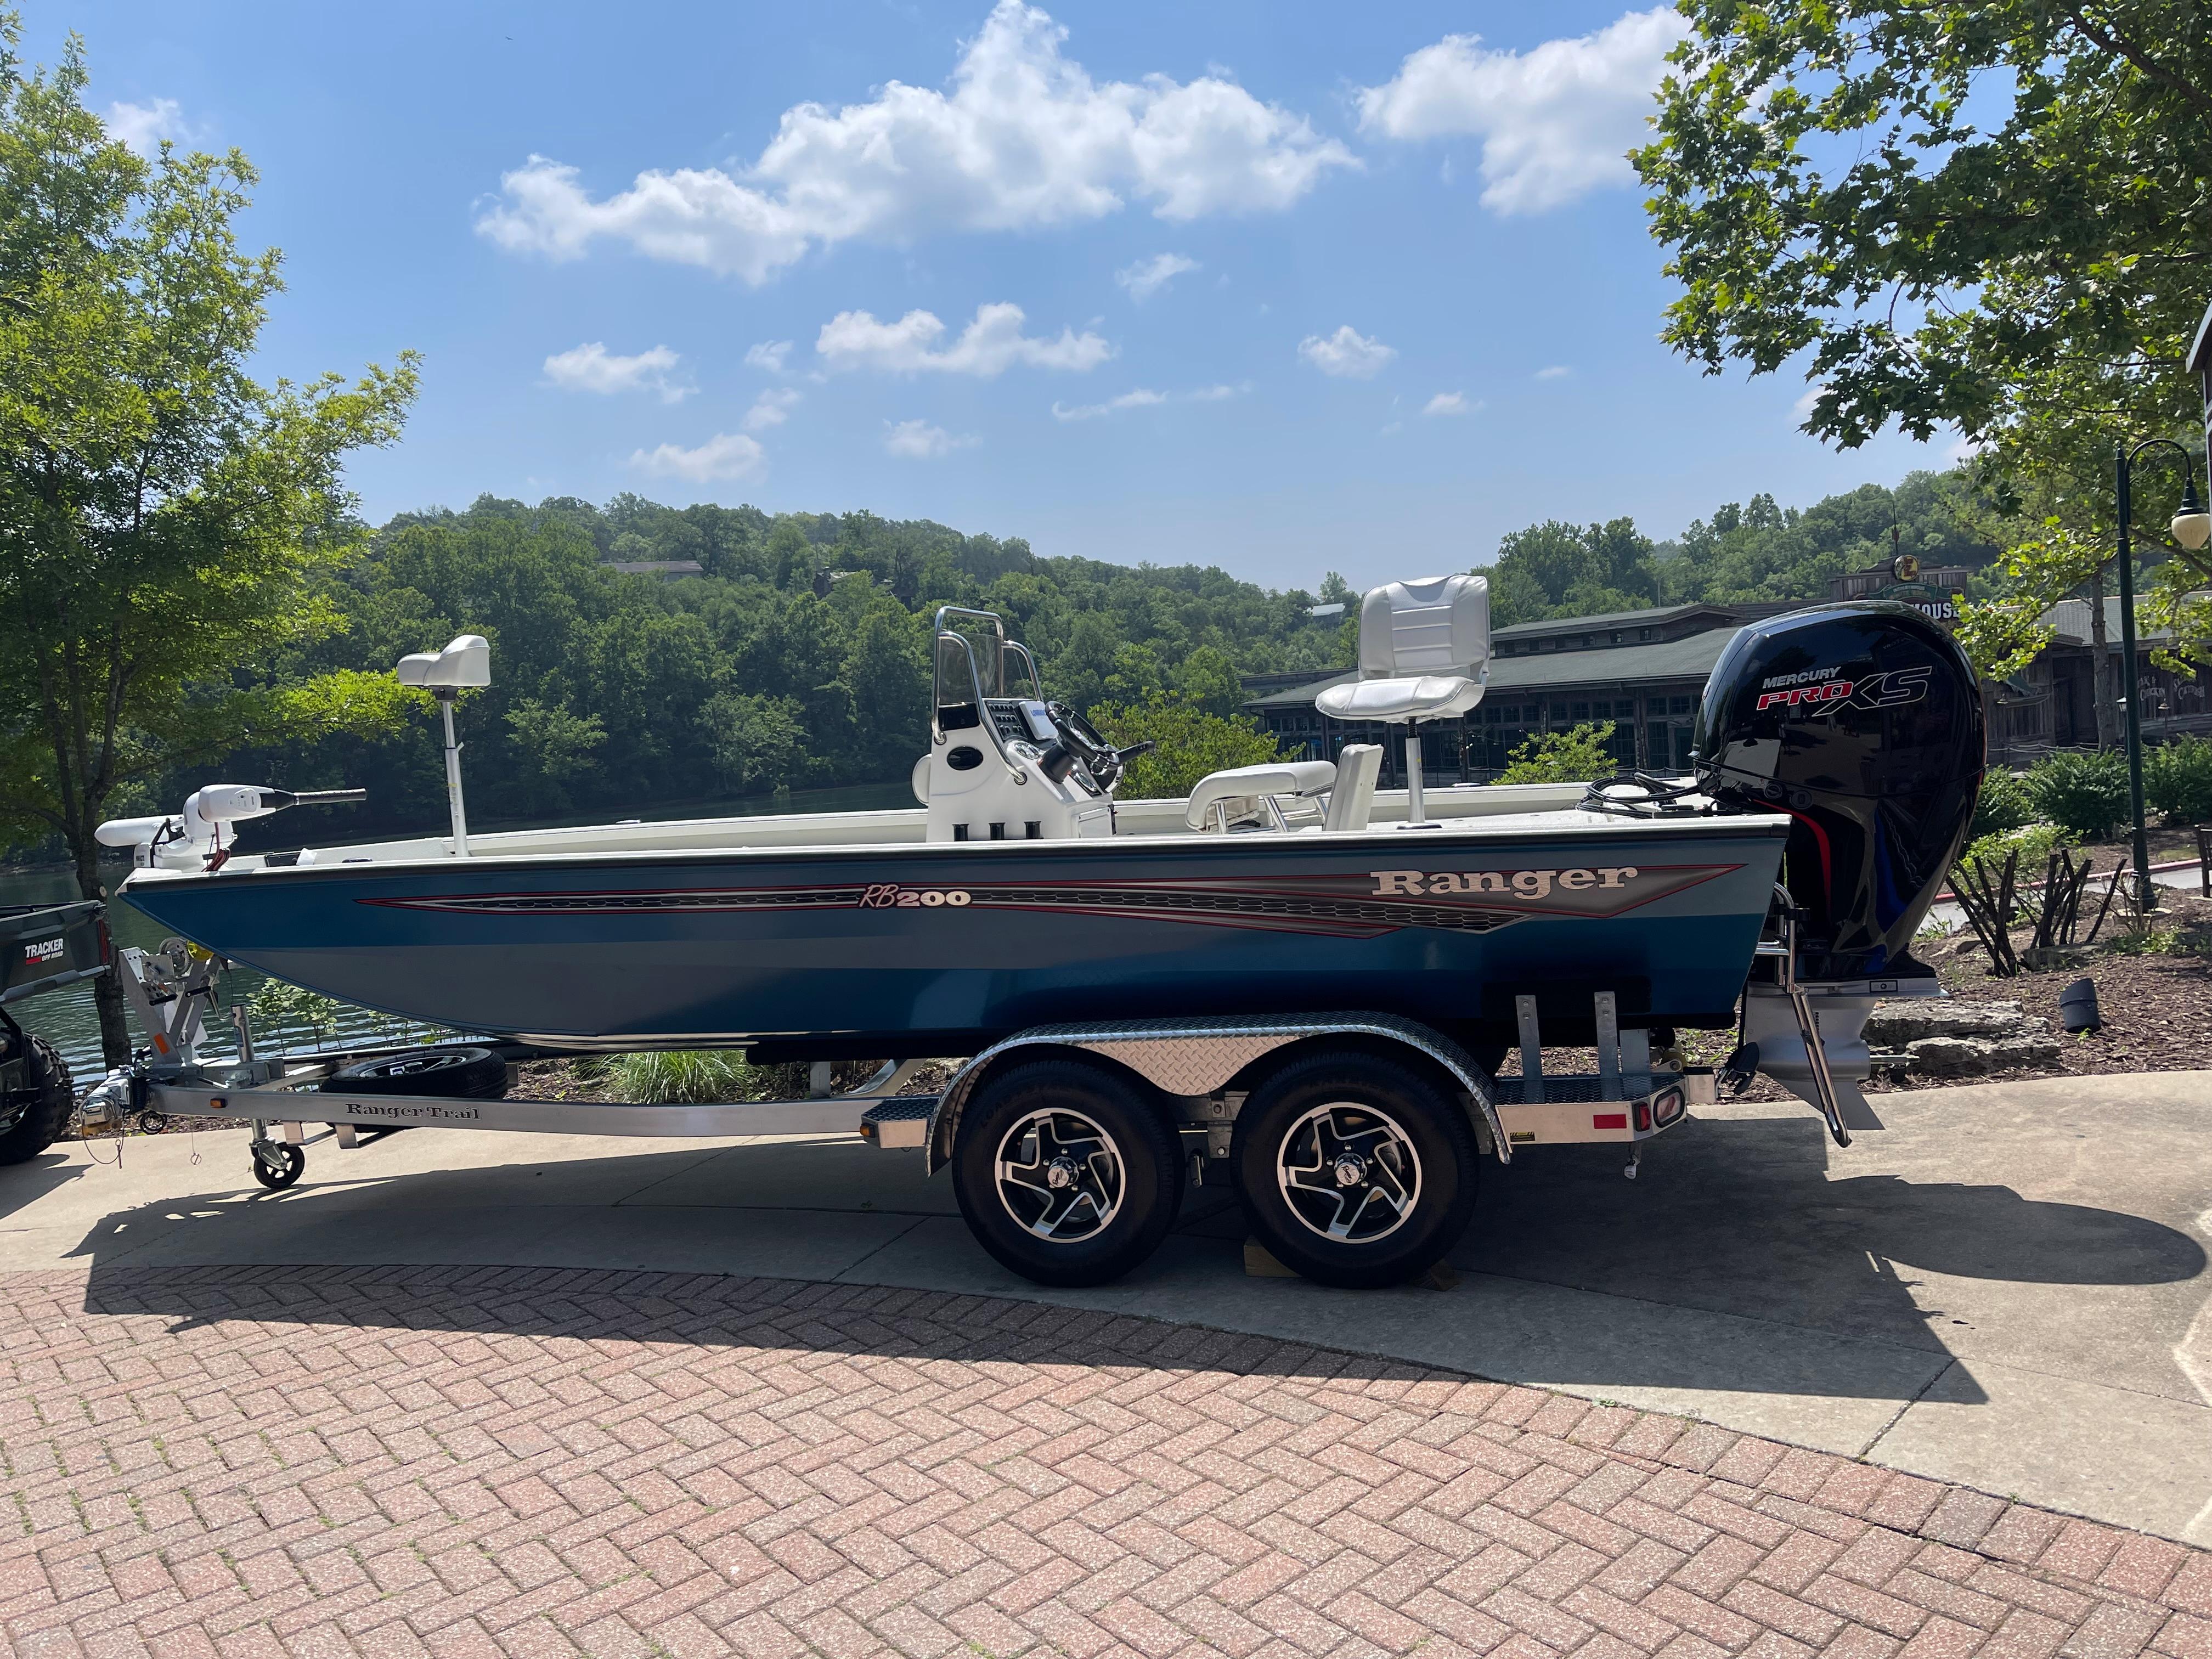 Ranger Boats for sale, Lake of the Ozarks, MO